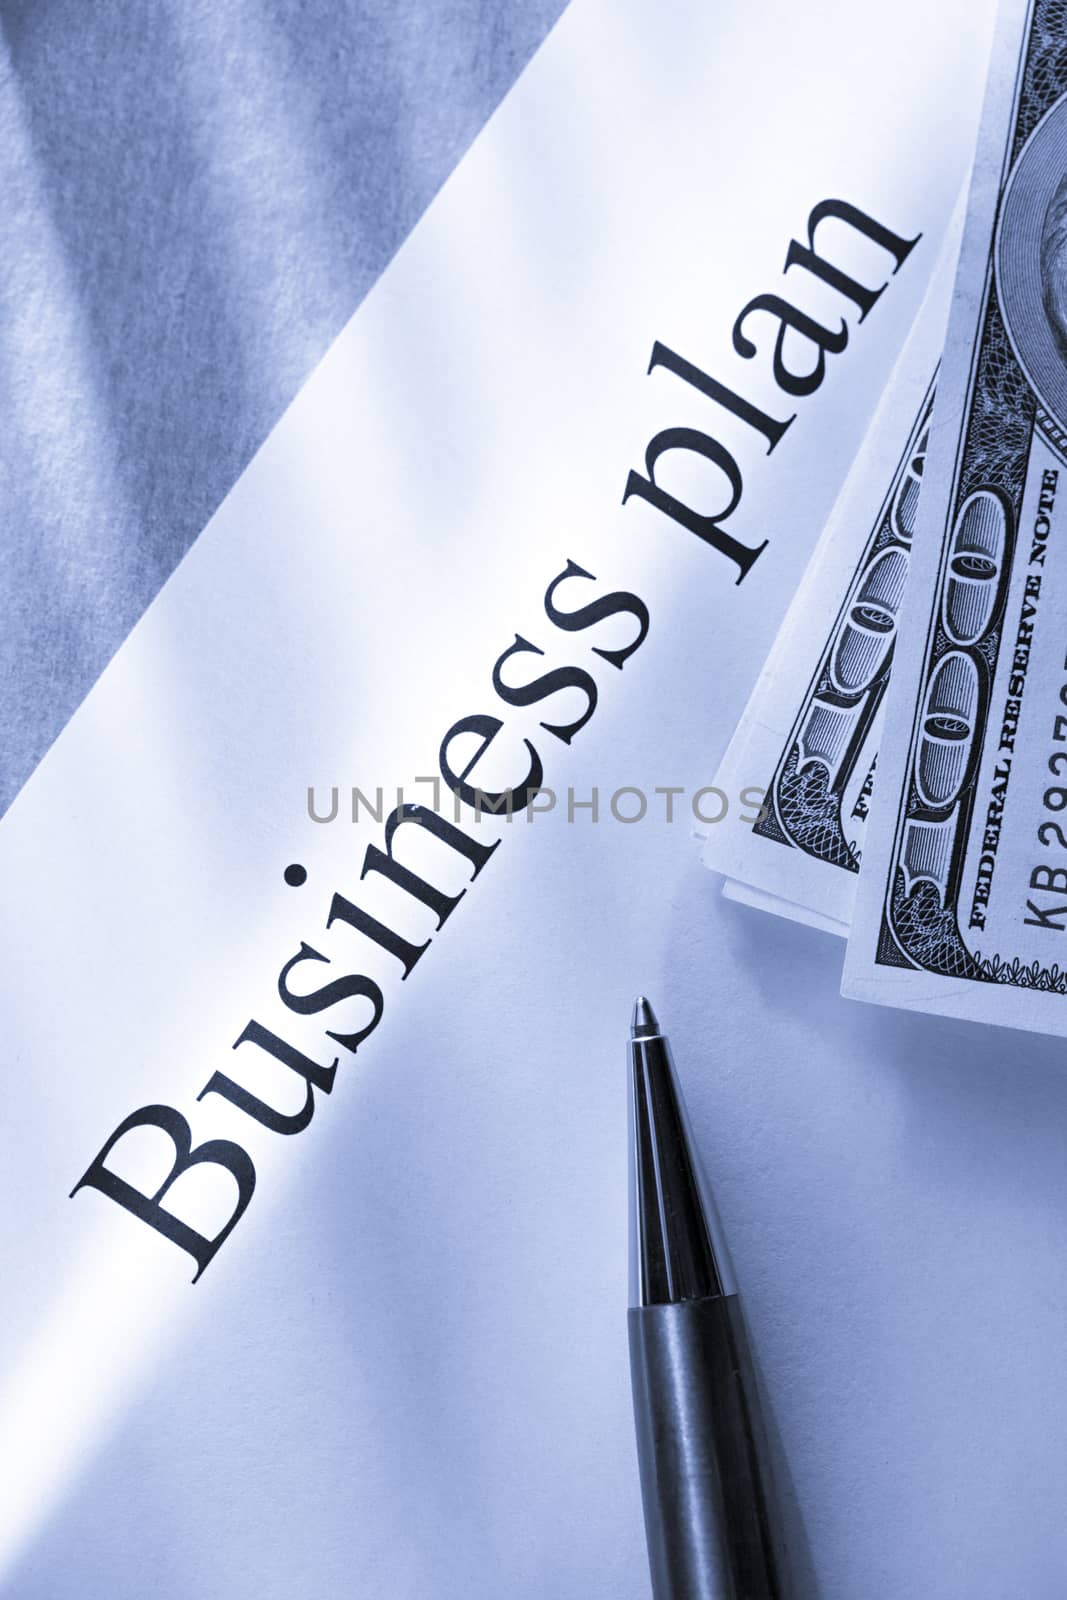 Business plan conception with money by Garsya